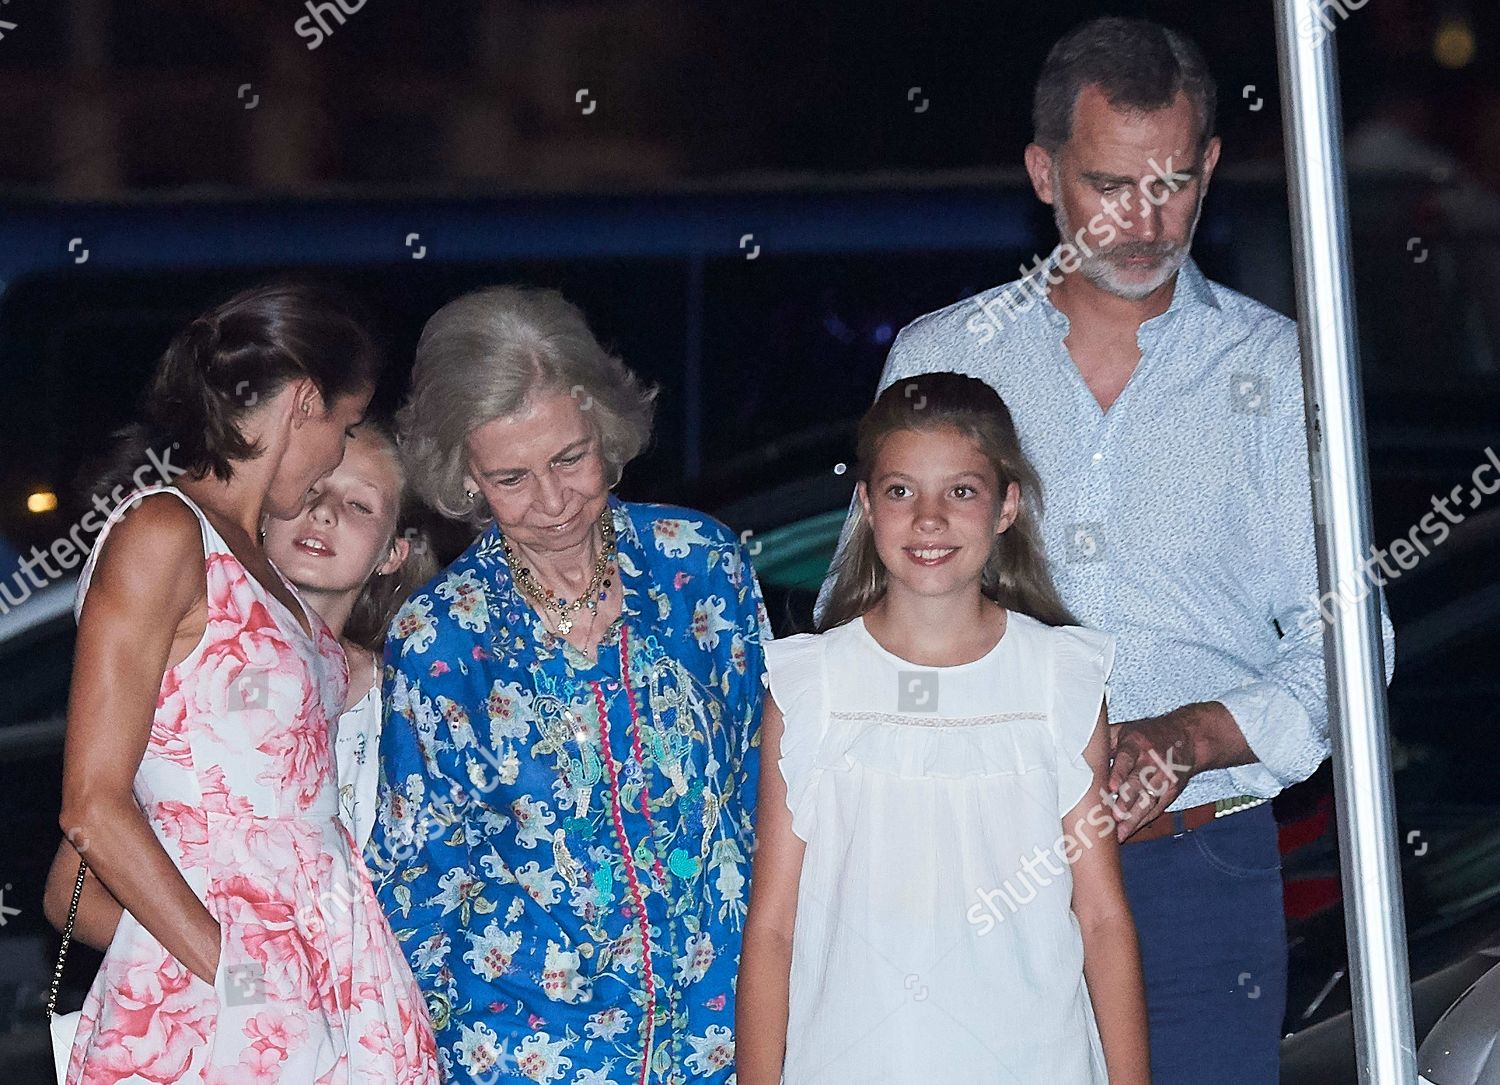 spanish-royals-out-and-about-palma-spain-shutterstock-editorial-10354136q.jpg